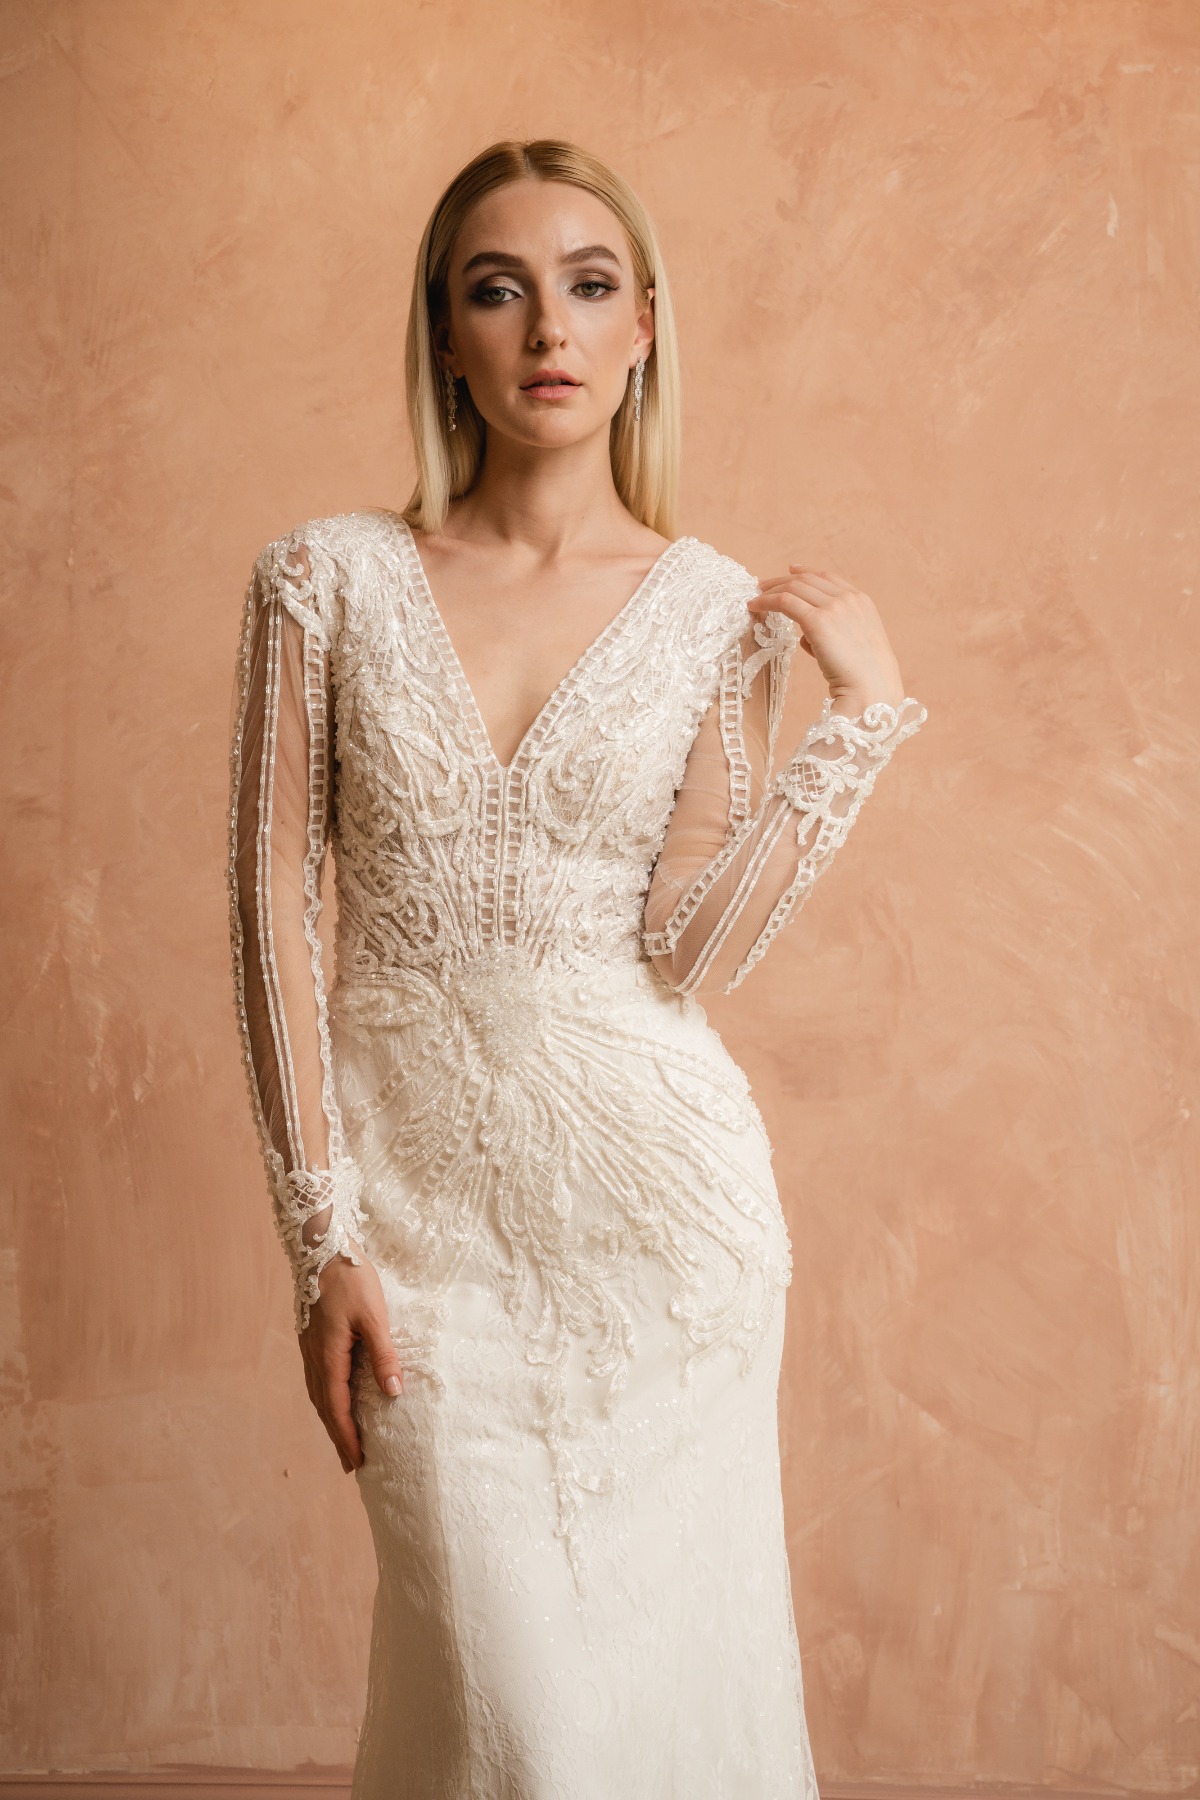 Jana Ann Couture Launches 2nd Flagship Bridal Boutique in Southern California